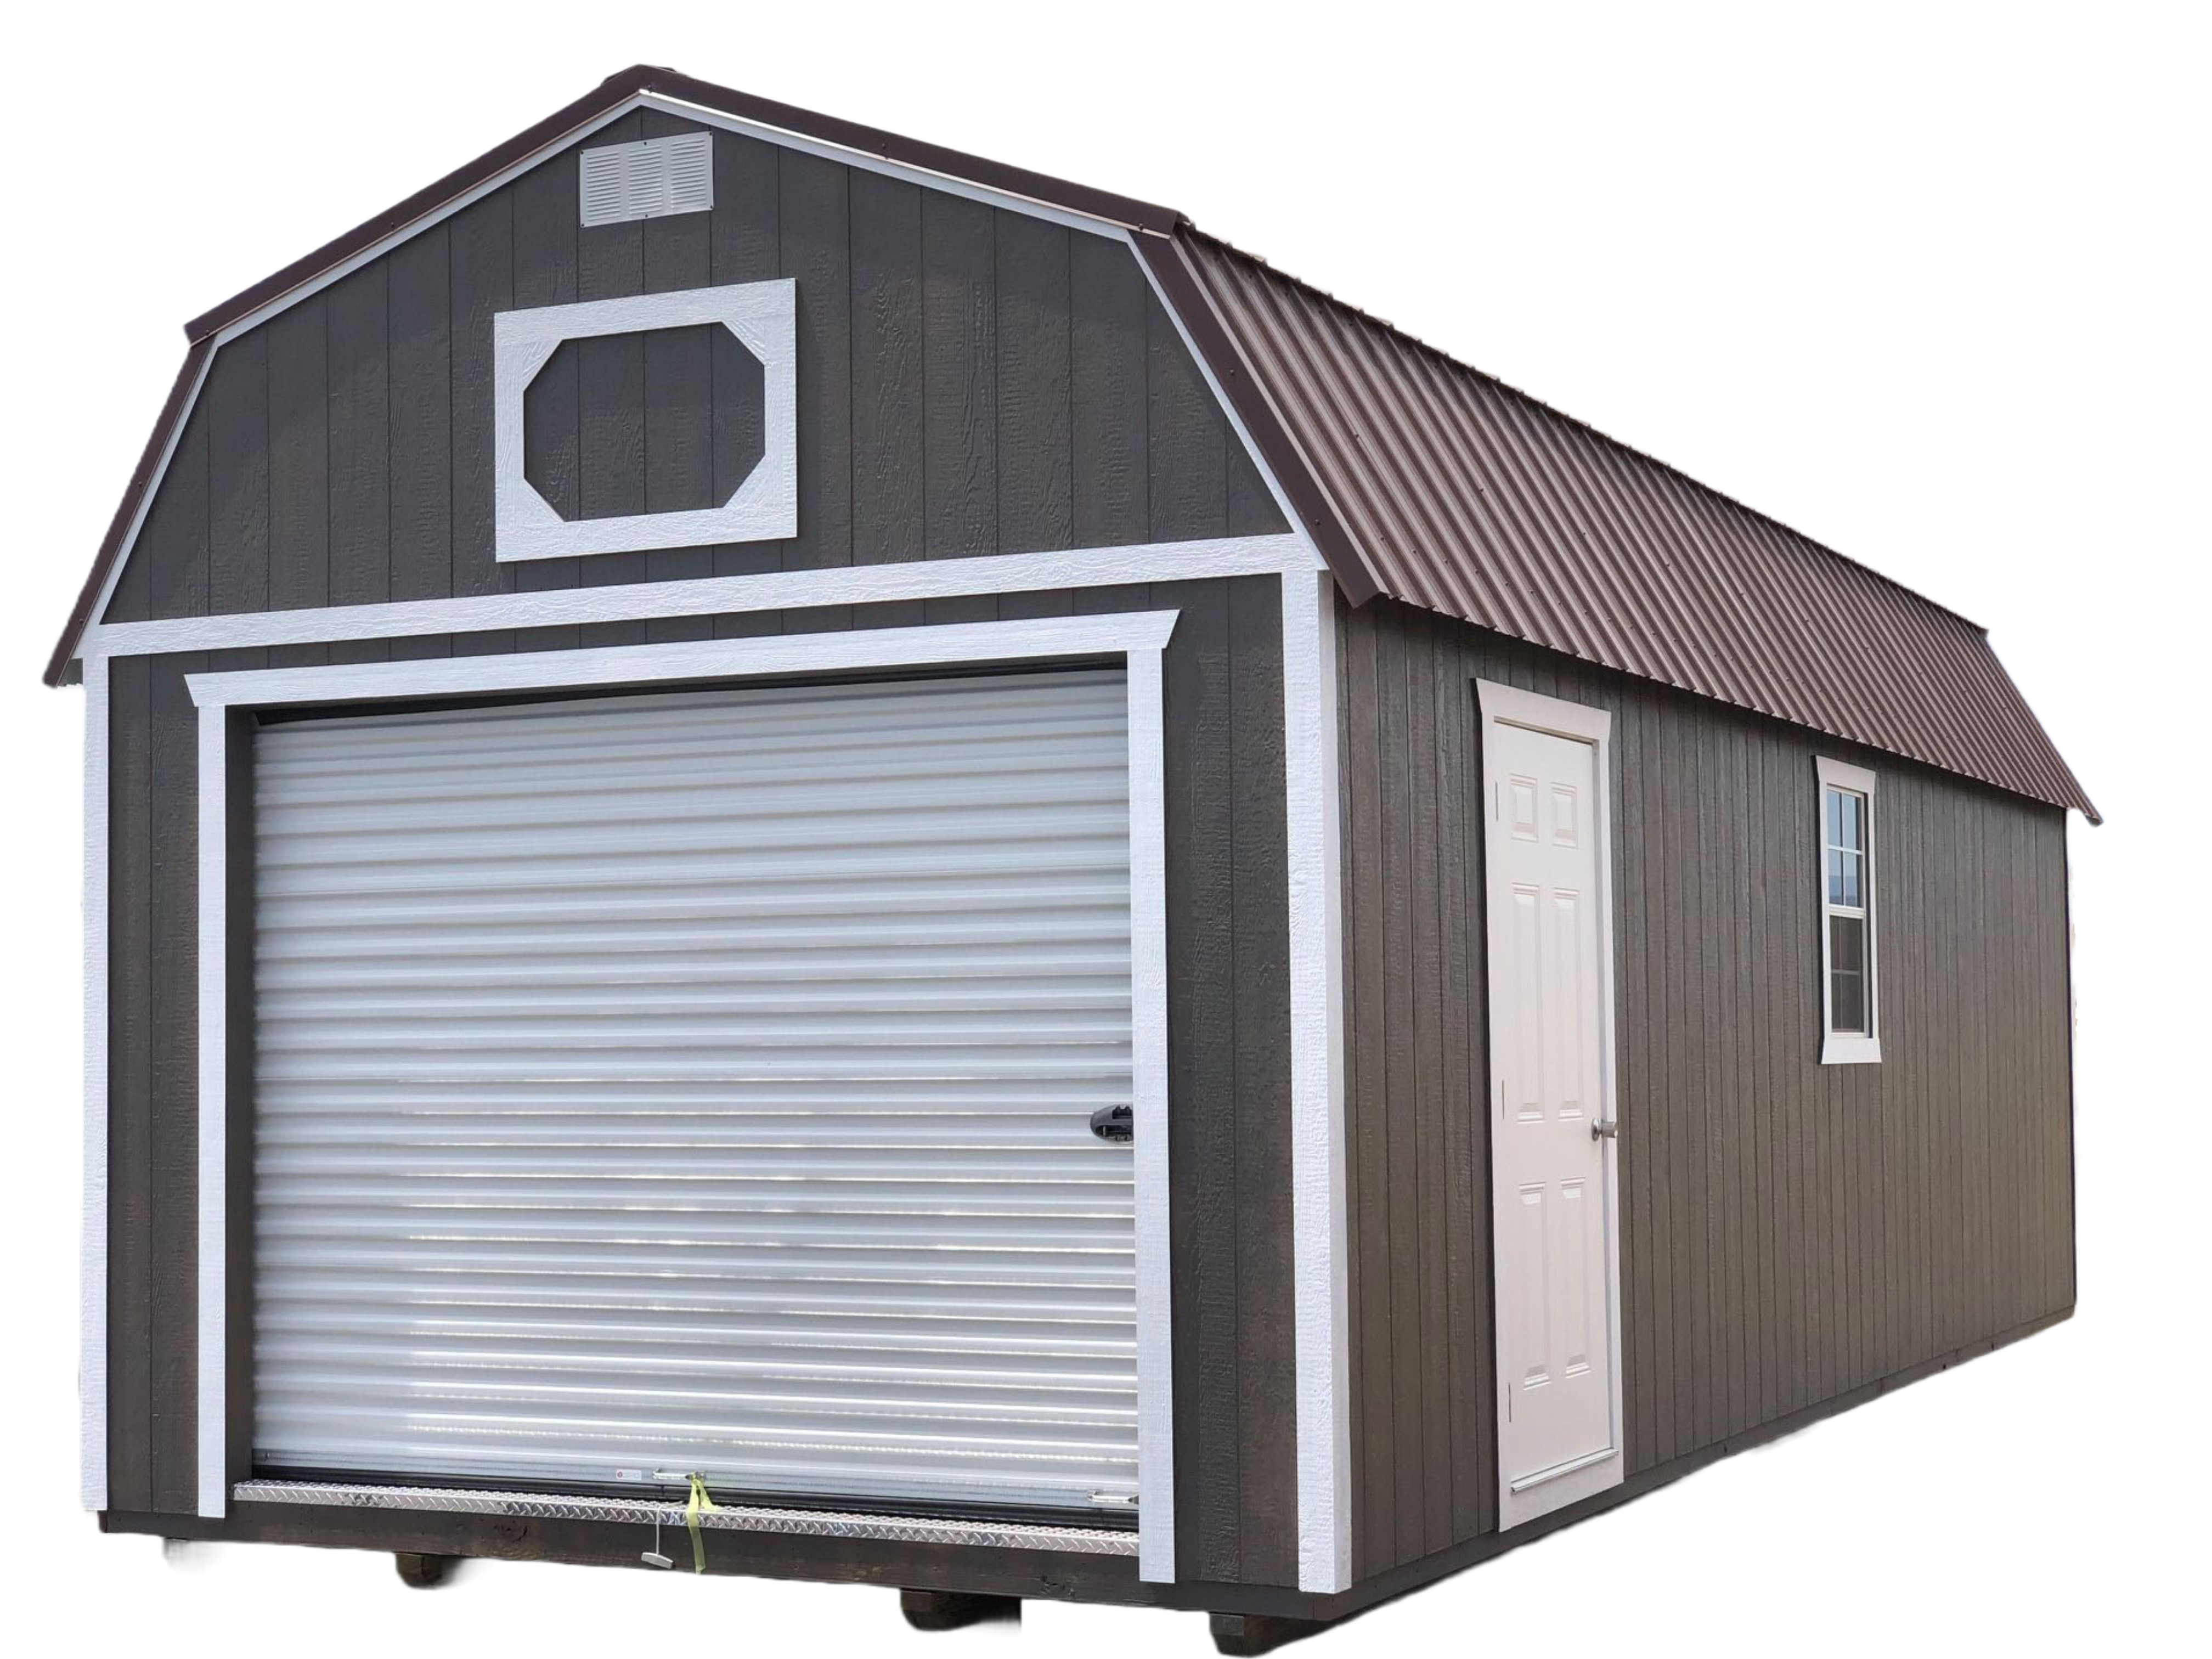 Deluxe Lofted Barn Cabin Building Brown with Cream Color siding